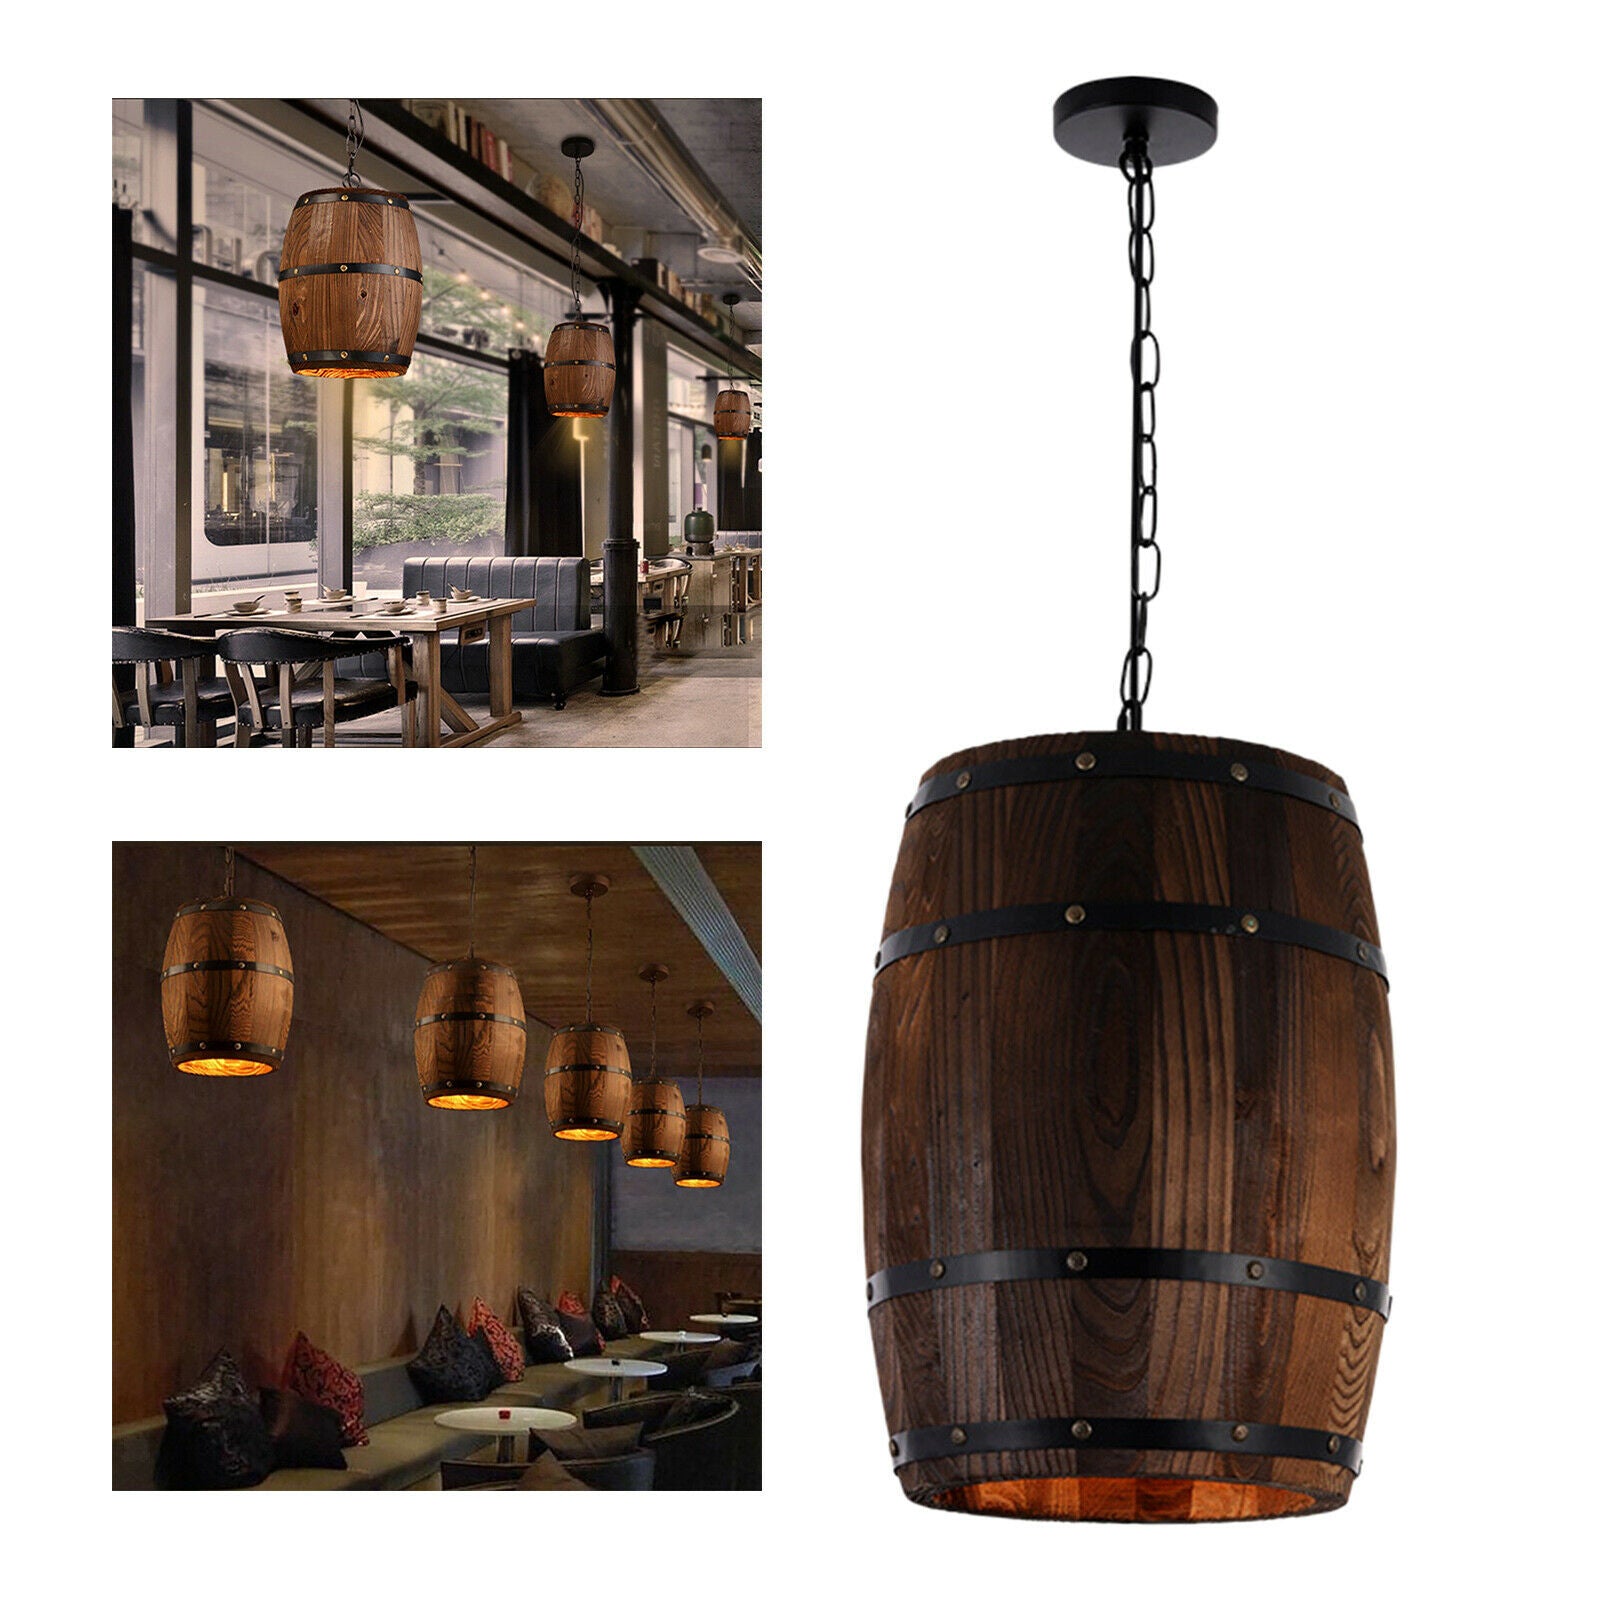 Nordic Wooden Retro Lampshade Hotel Wood Barrel Shape Ceiling Light Cover